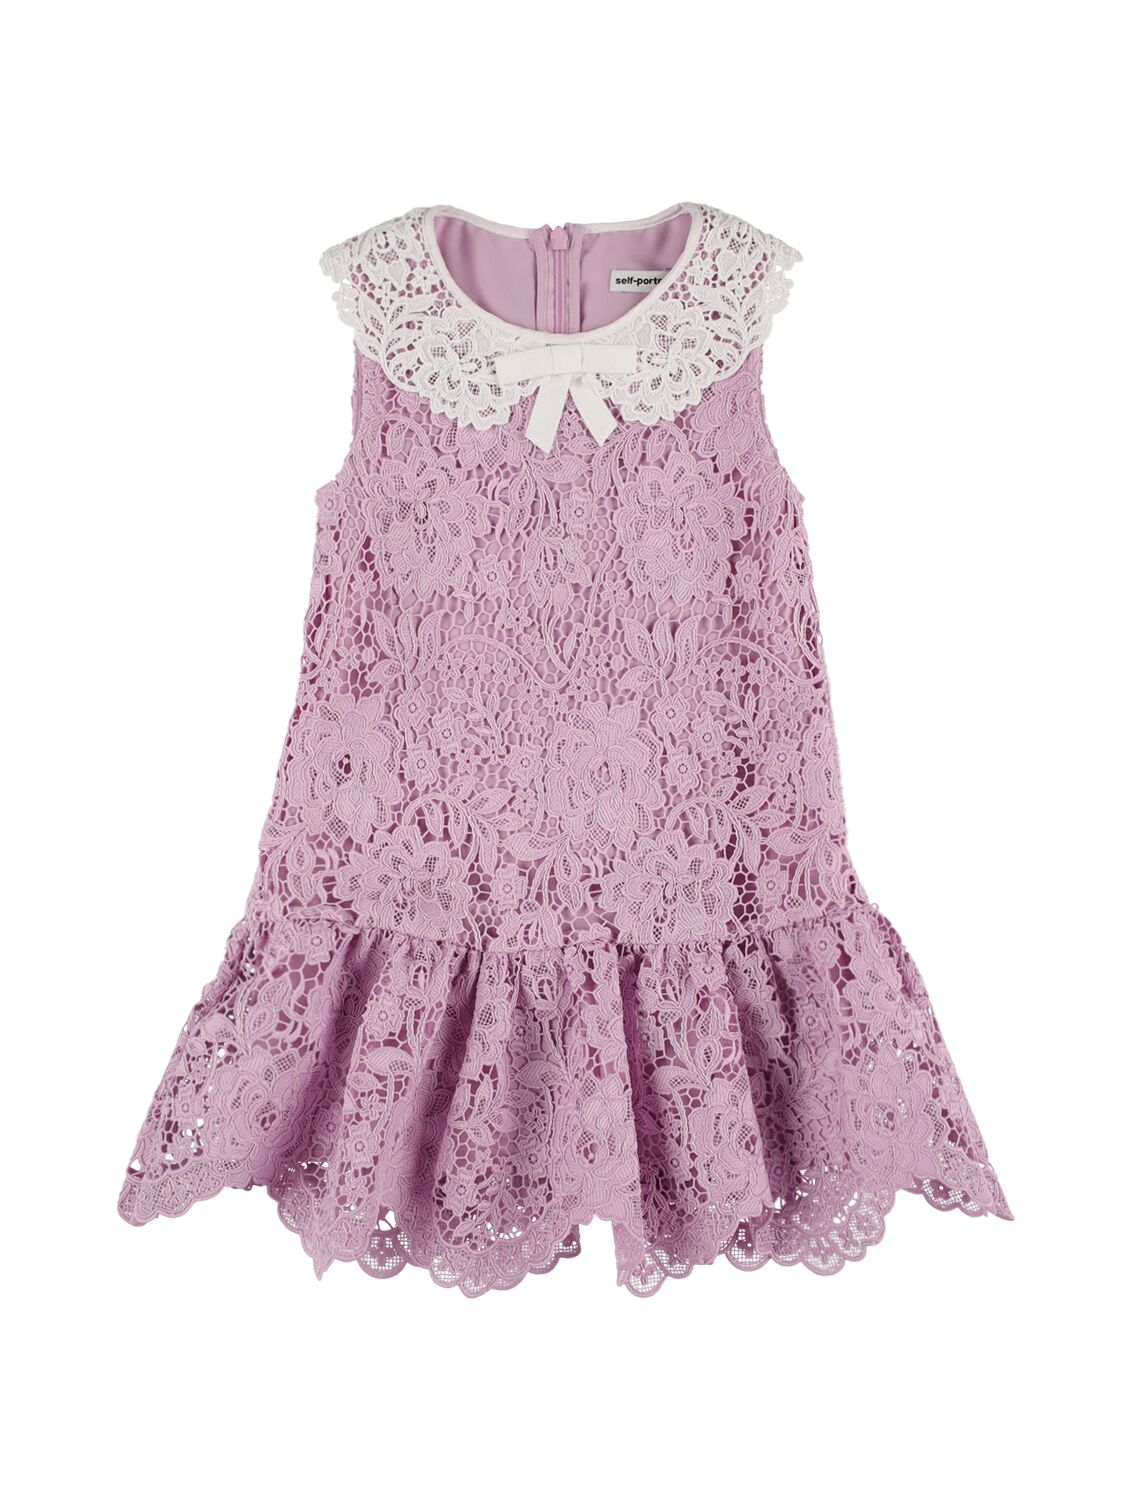 Self-portrait Kids' Floral Lace Sleeveless Dress W/ Bow In Pink